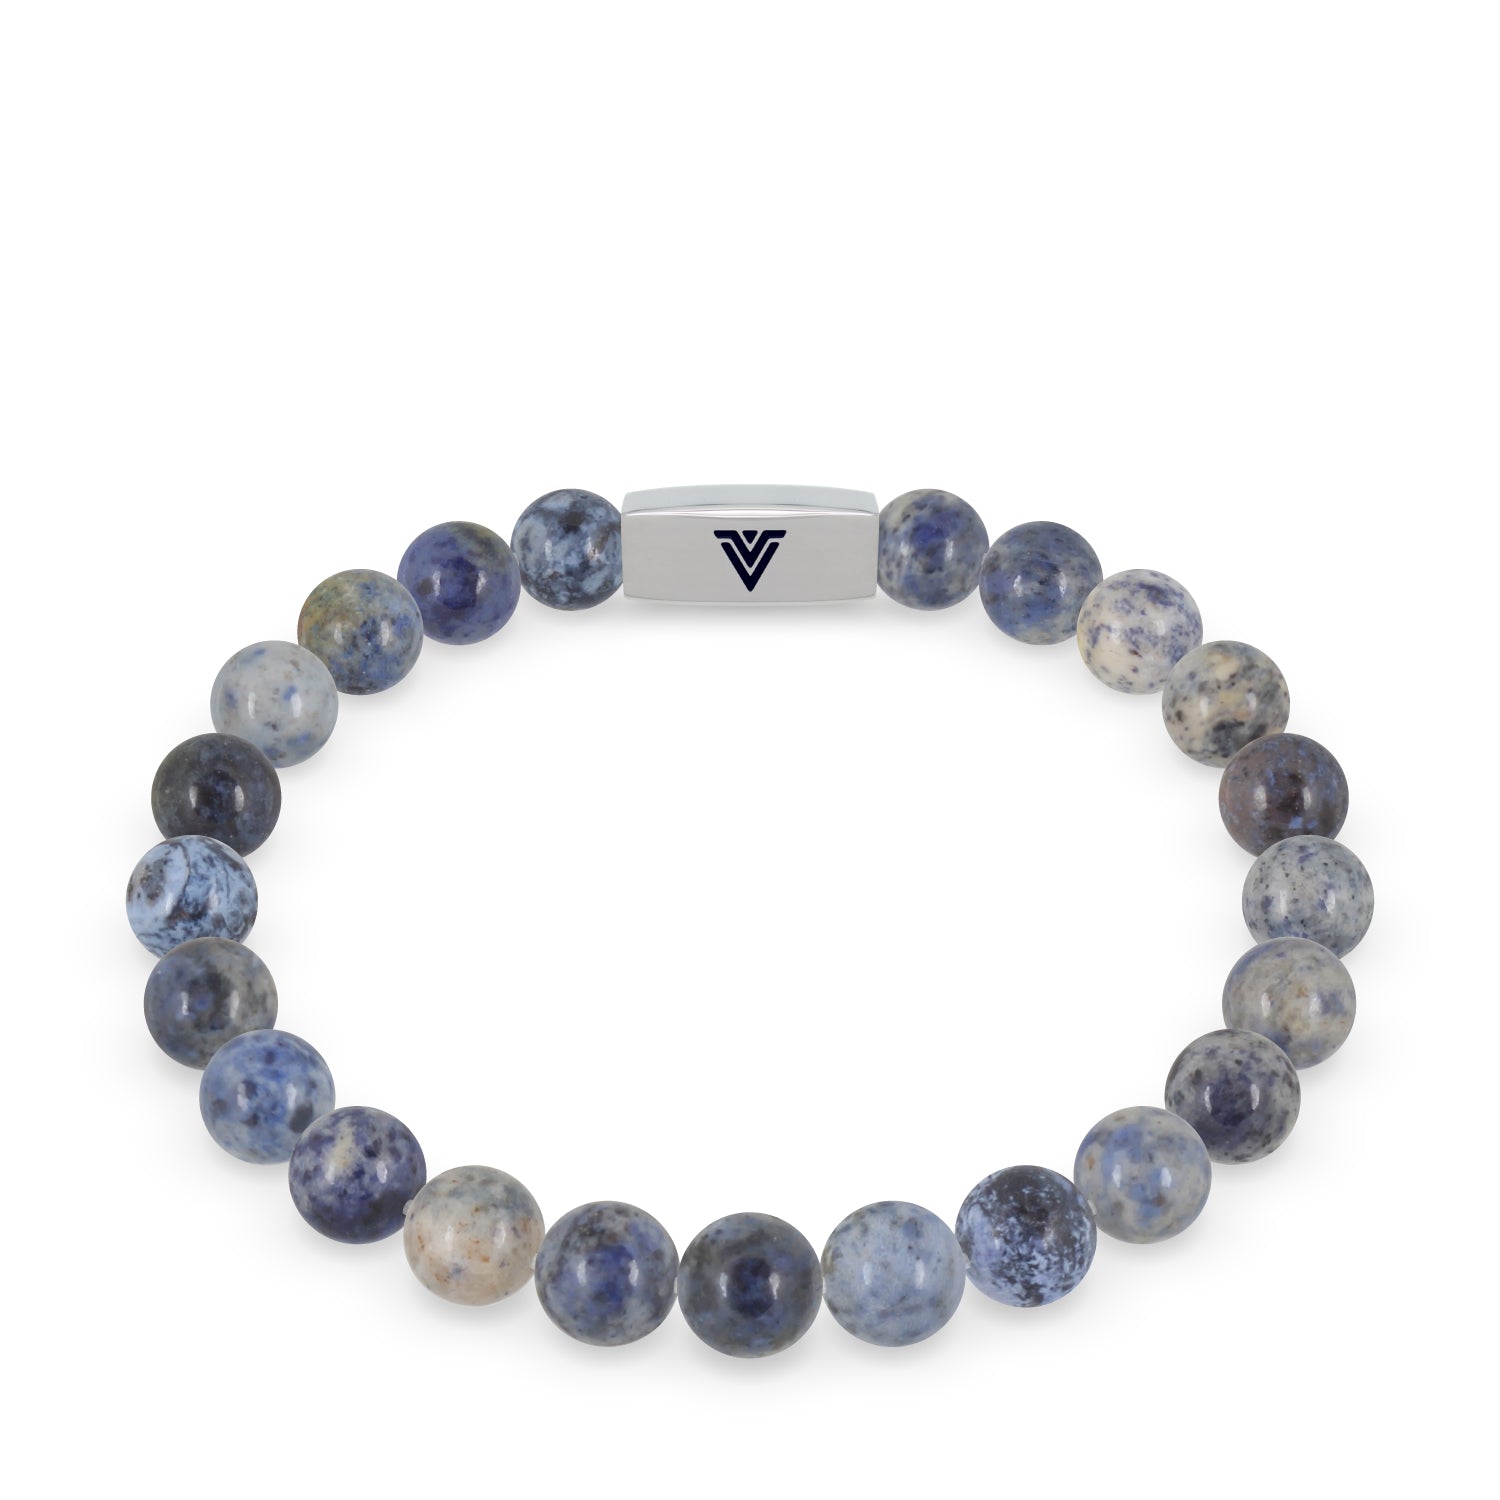 Front view of an 8mm Dumortierite beaded stretch bracelet with silver stainless steel logo bead made by Voltlin